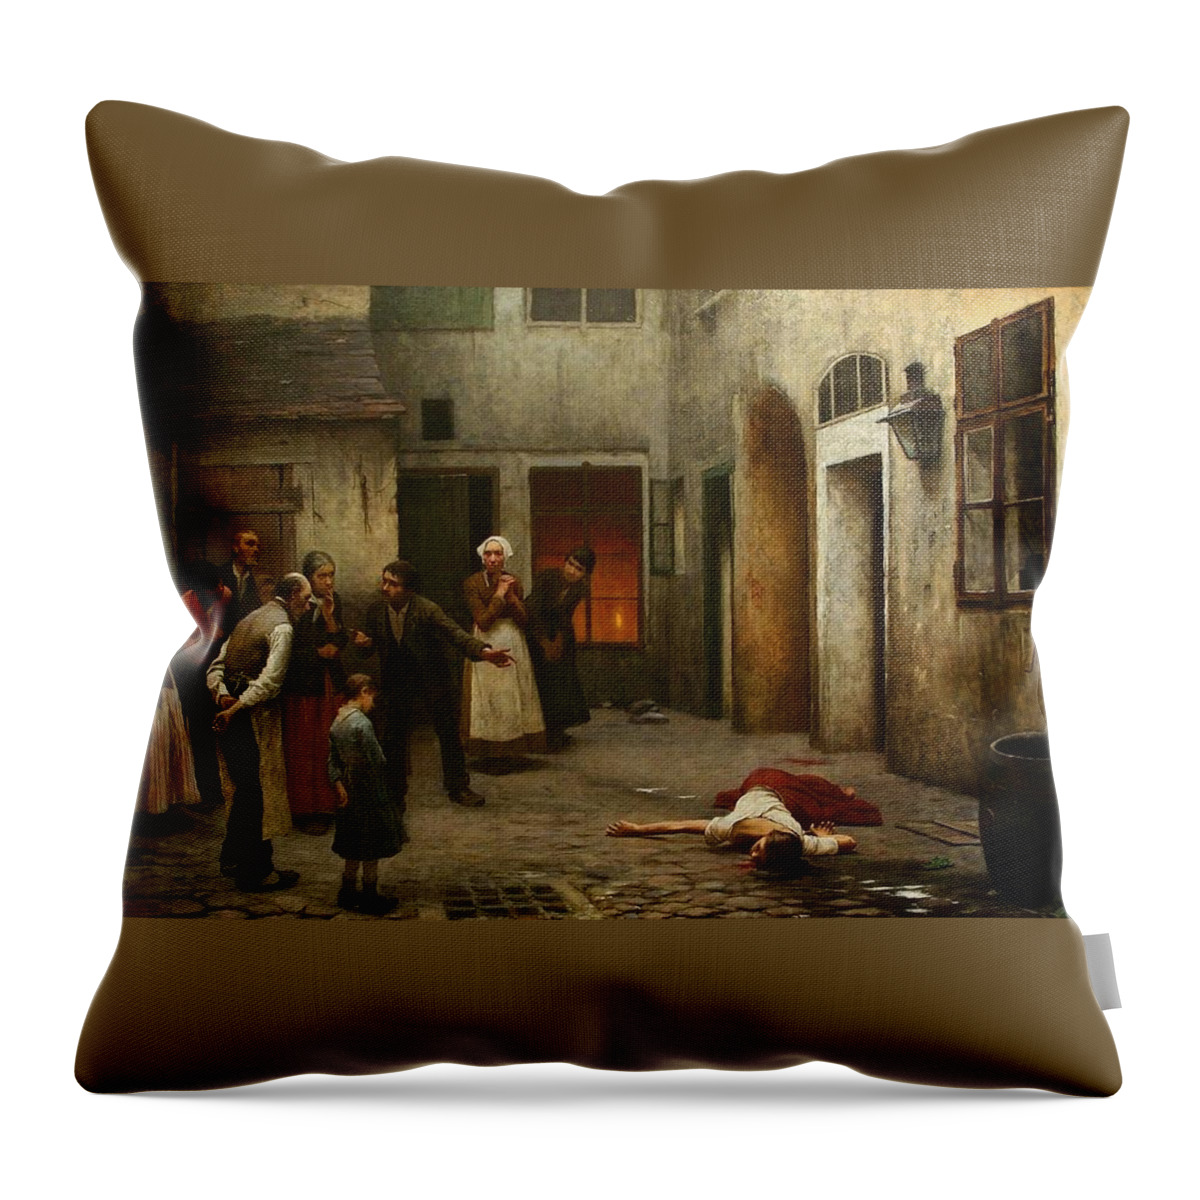 Jakub Schikaneder Throw Pillow featuring the painting Murder In The House by MotionAge Designs